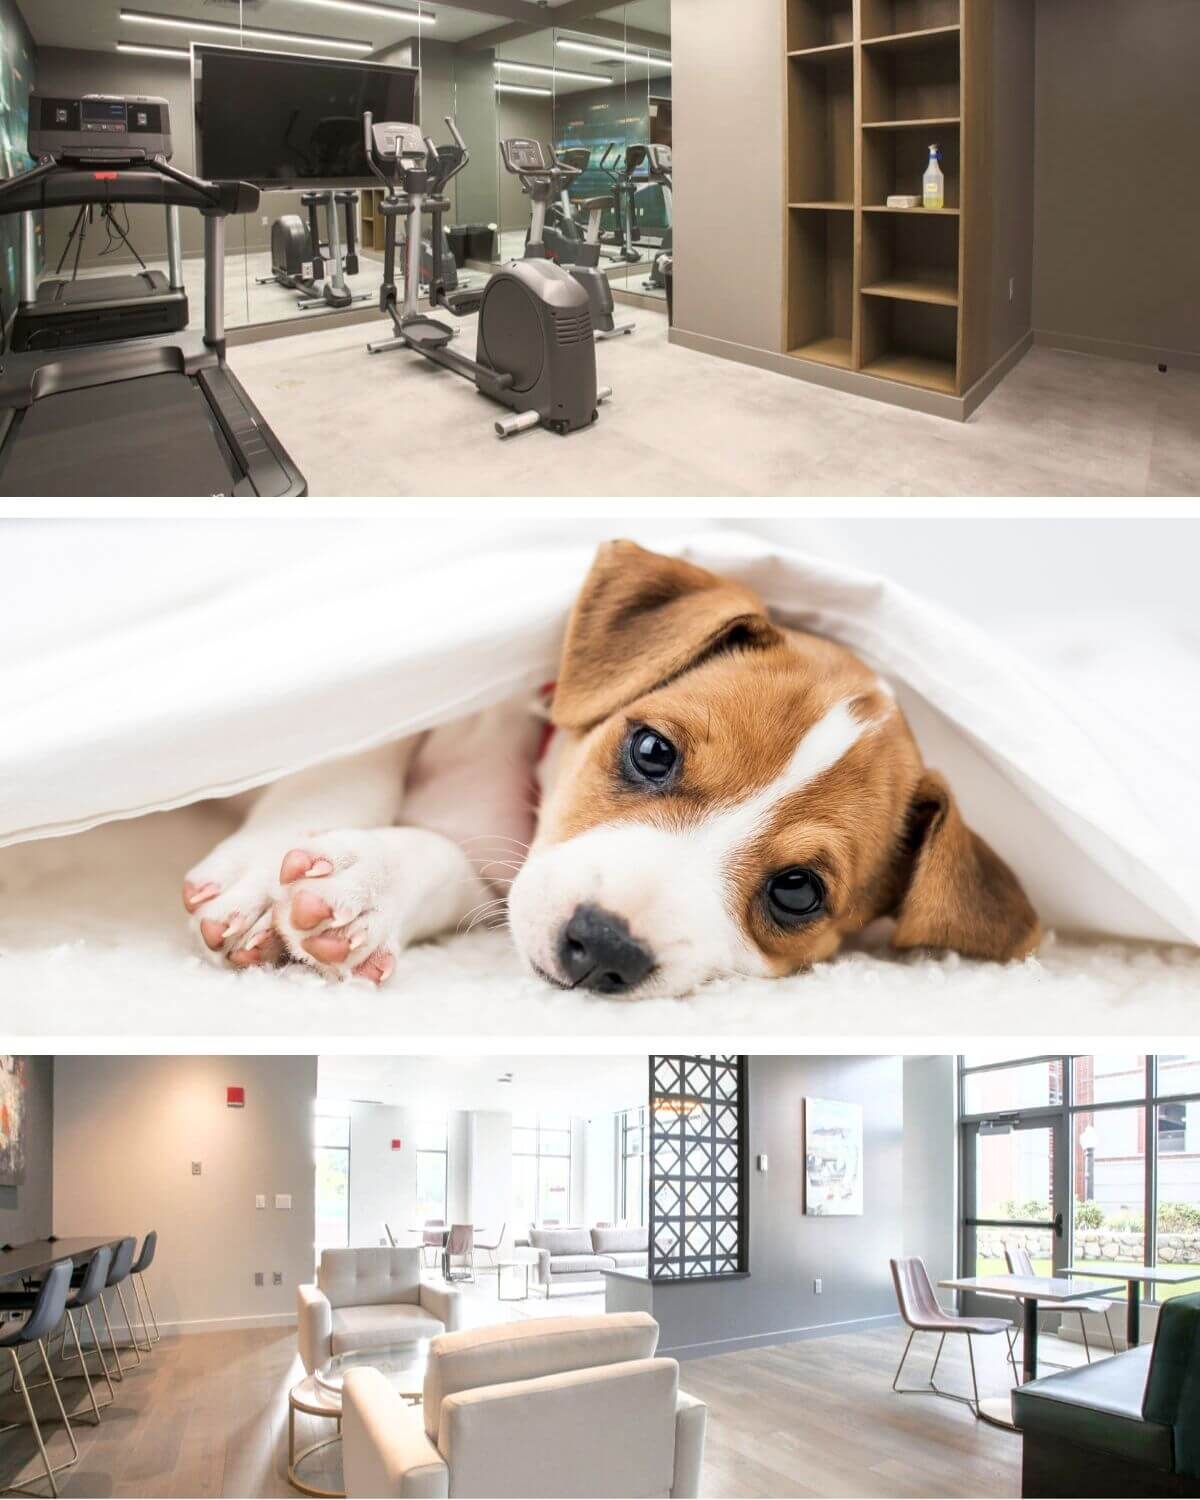 Views of the gym, a puppy relaxing and the apartment interior showing plenty of seating